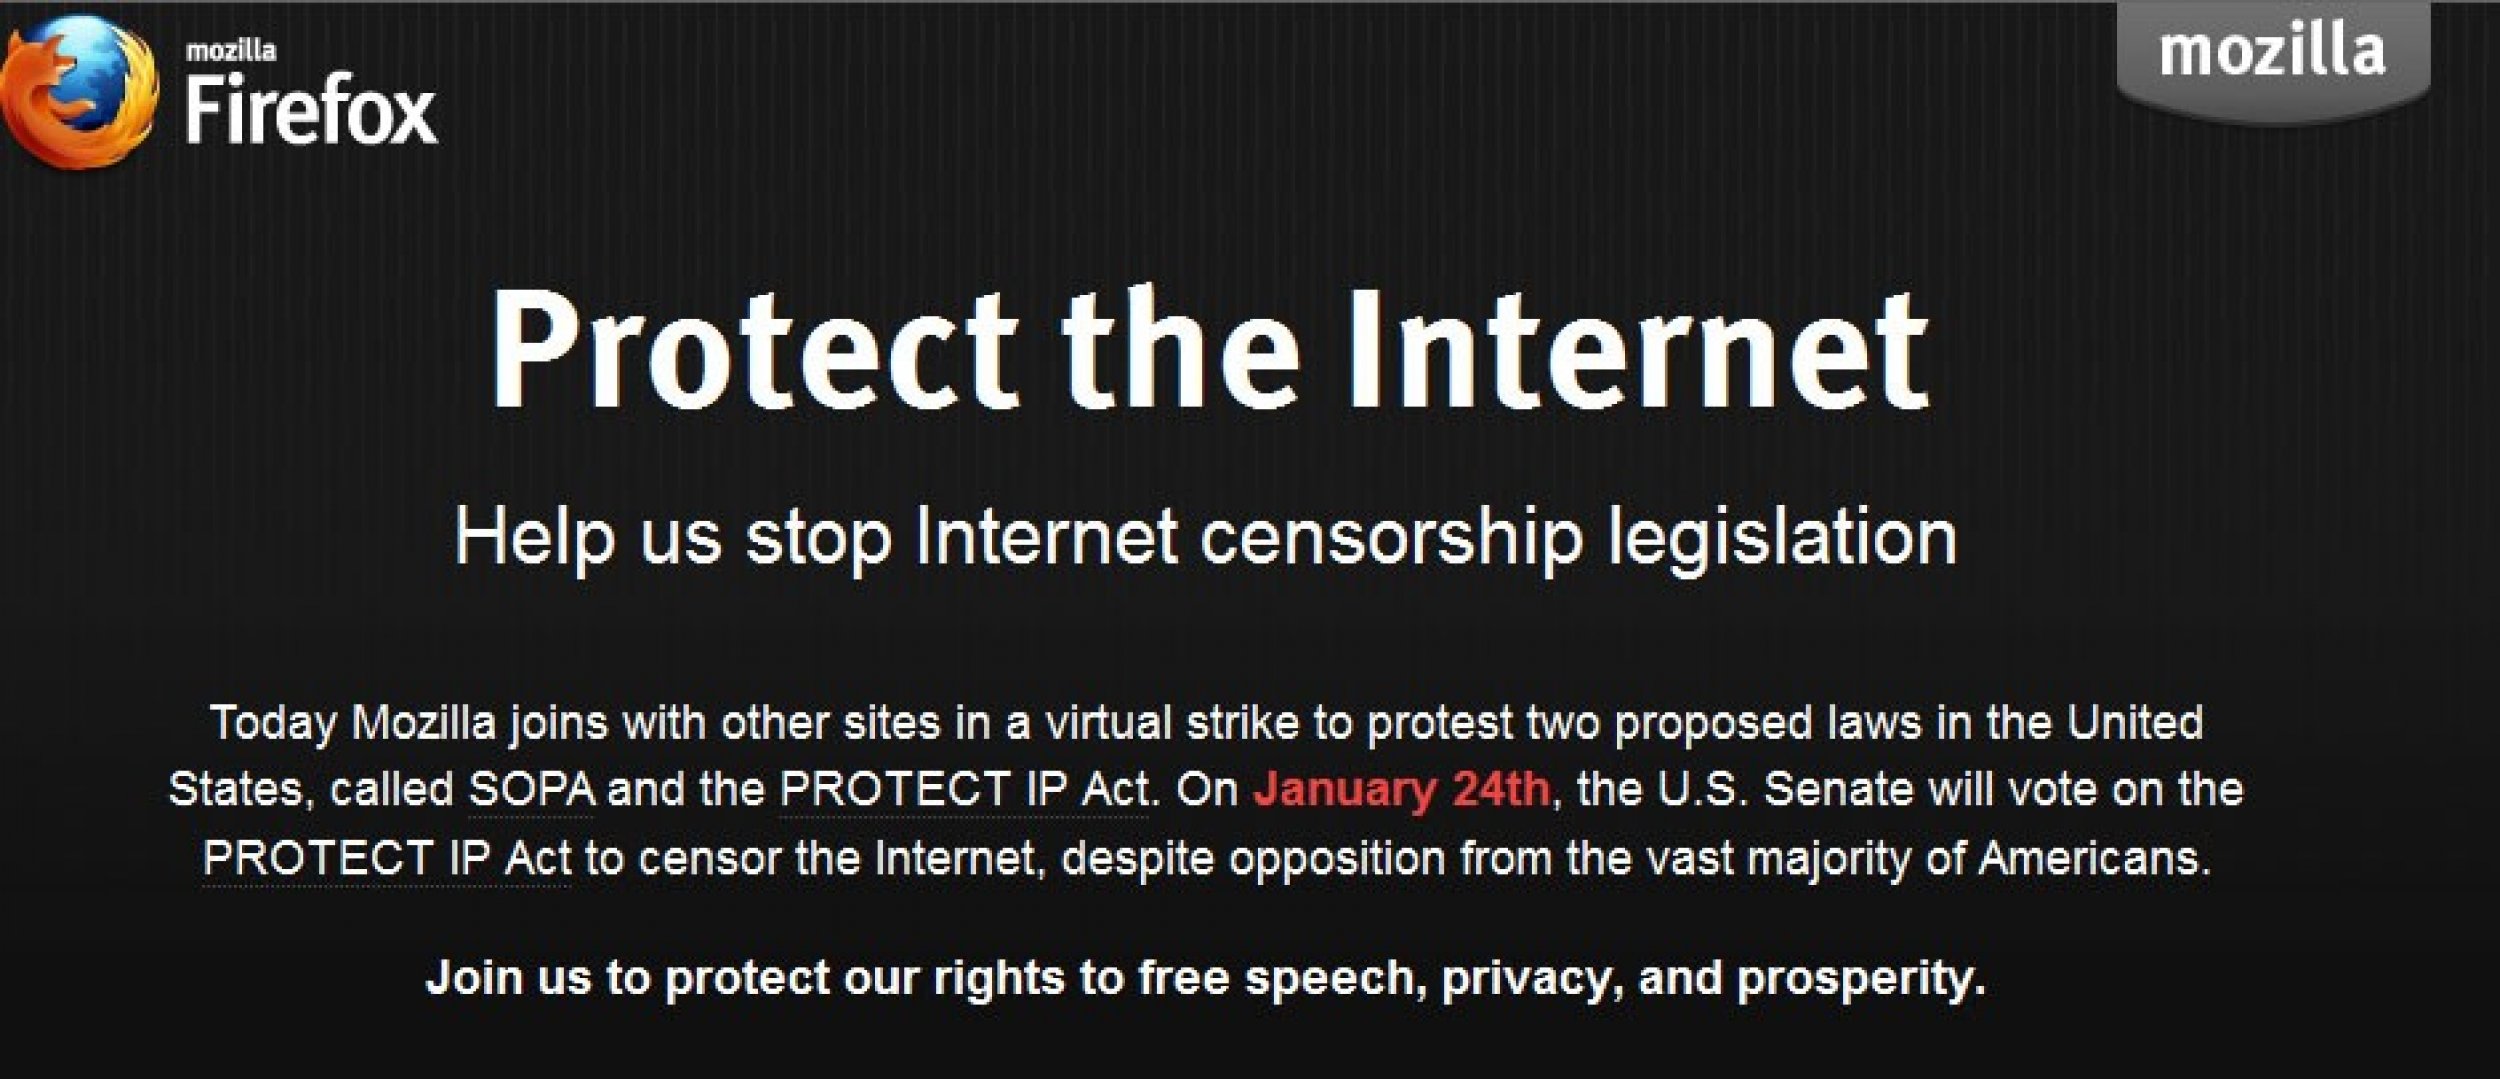 Mozilla Blackout in protest against SOPA